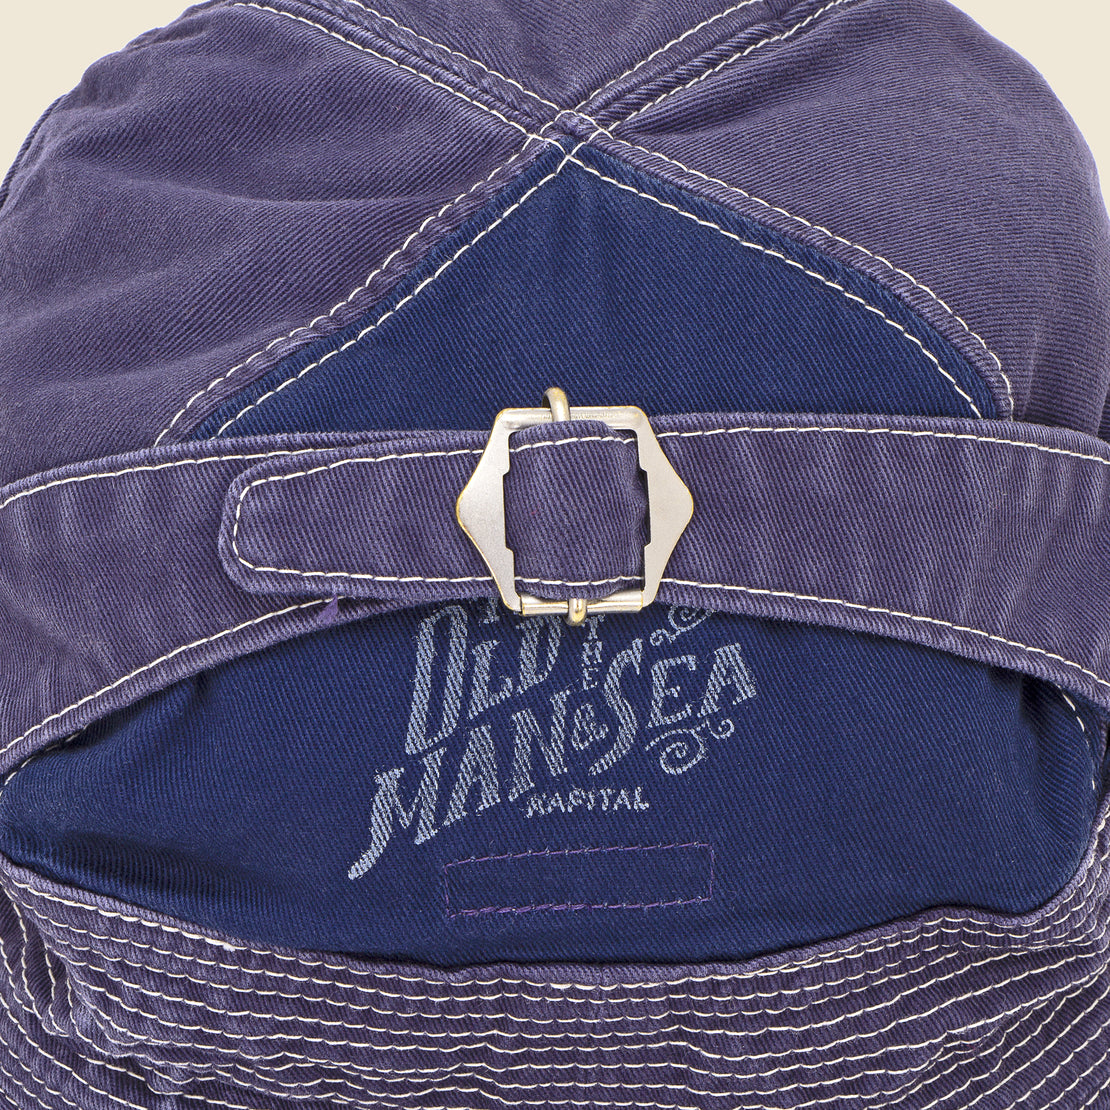 The Old Man and the Sea Bucket Hat - Navy - Kapital - STAG Provisions - Accessories - Hats